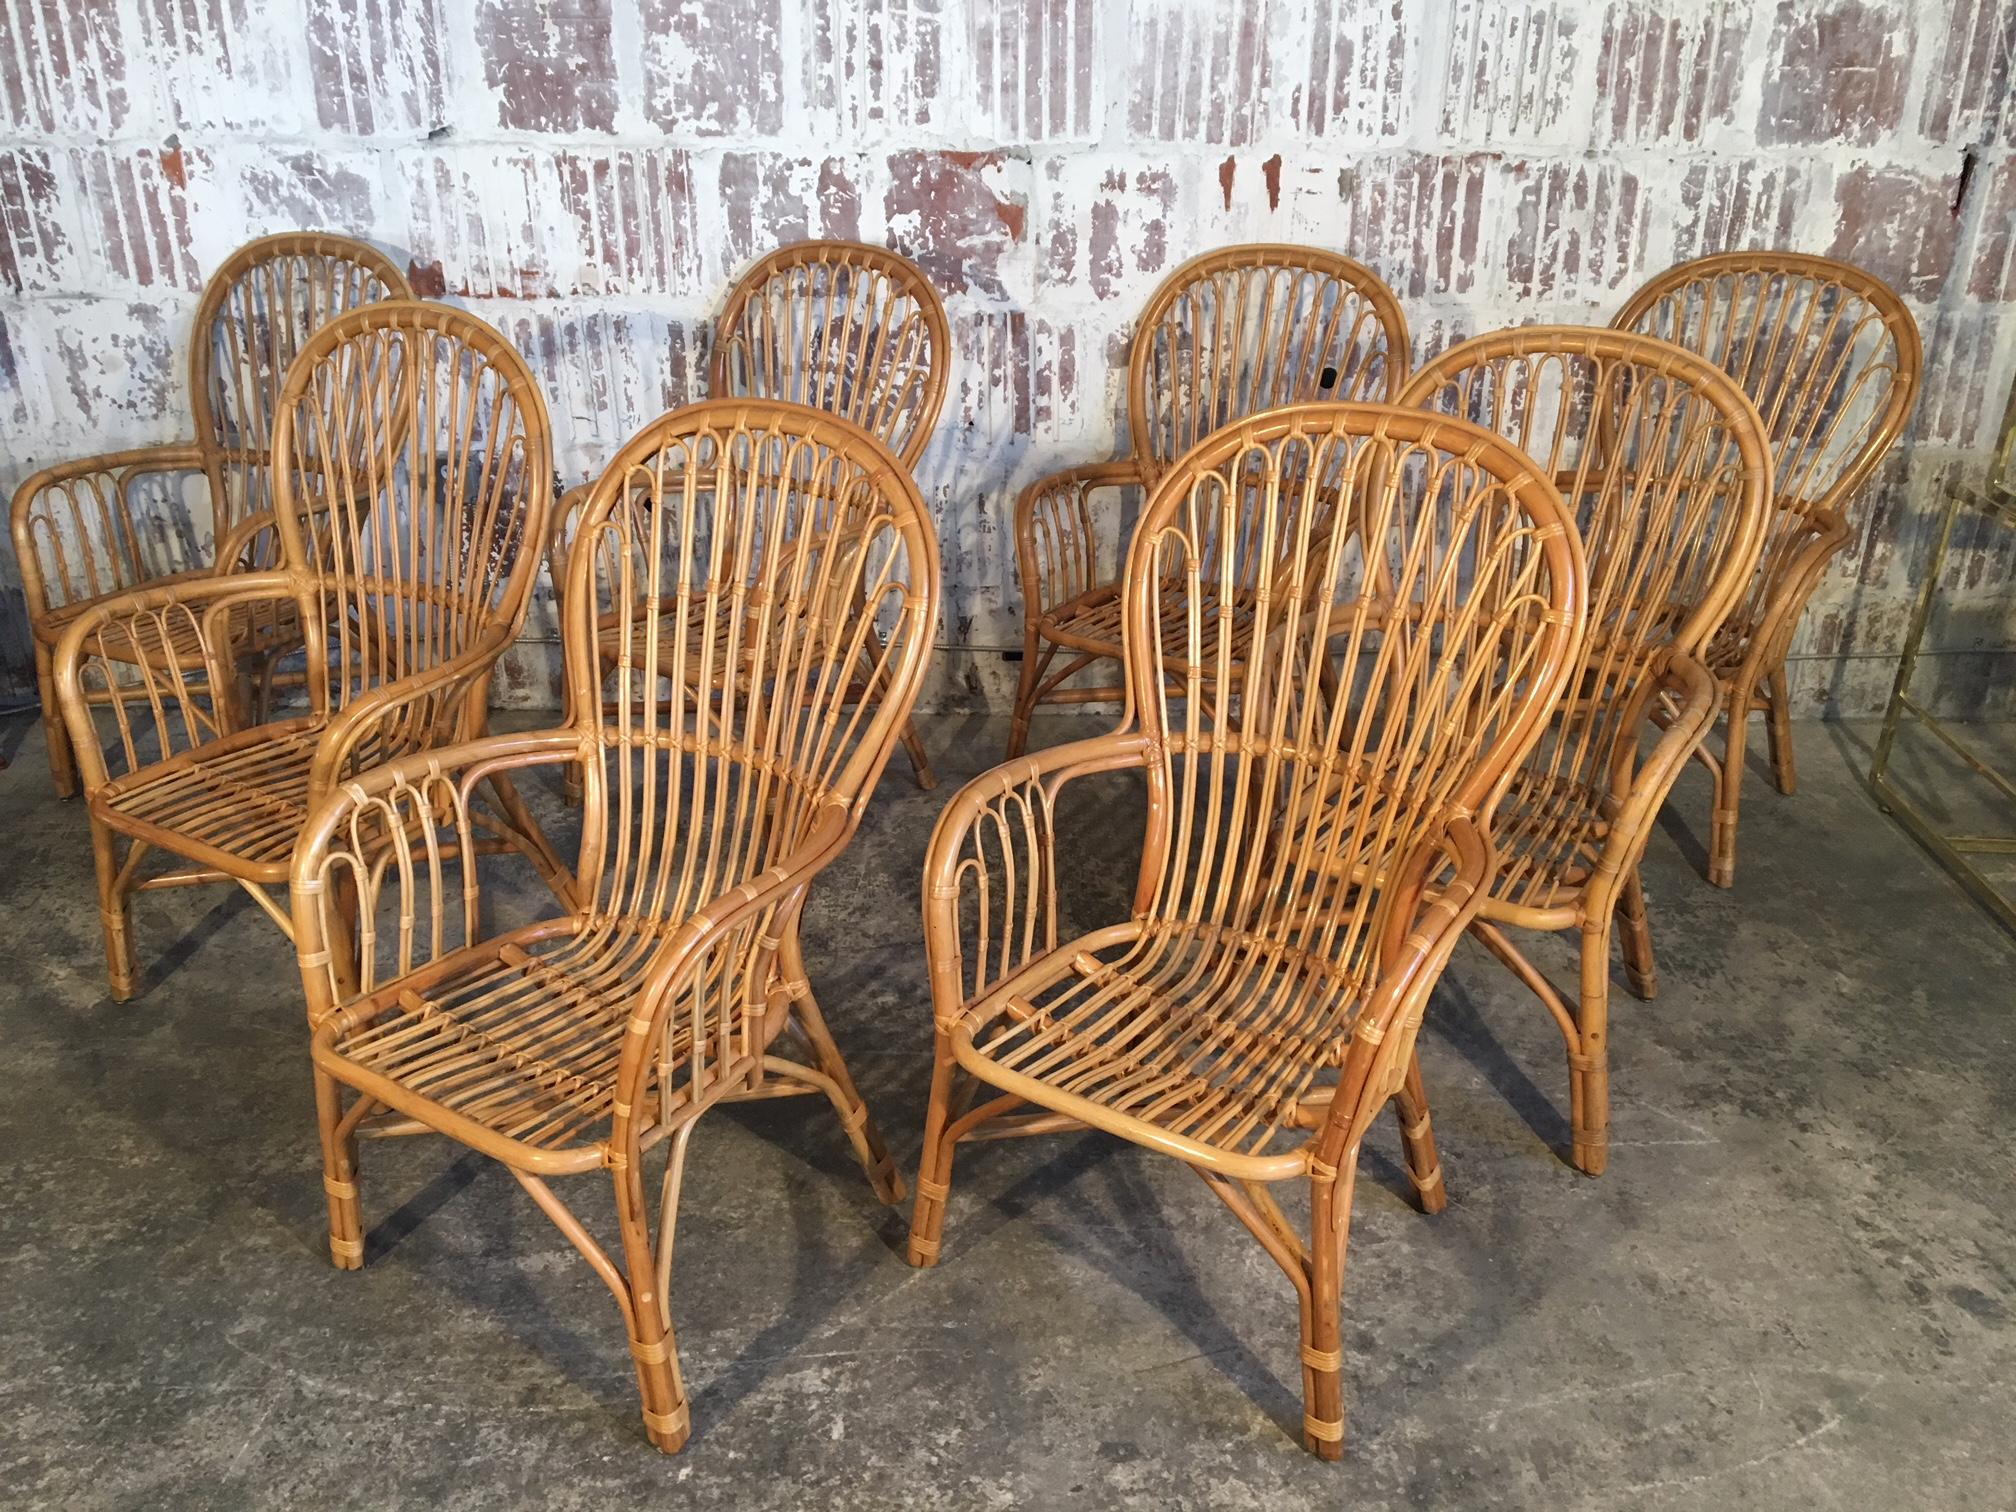 Set of 8 rattan fan-back arm chairs perfect for your tropical Palm Beach decor. Great example of midcentury bamboo furniture constructed by hand with craftsmanship that is no longer the norm. Some chairs are near perfect, others show abrasions